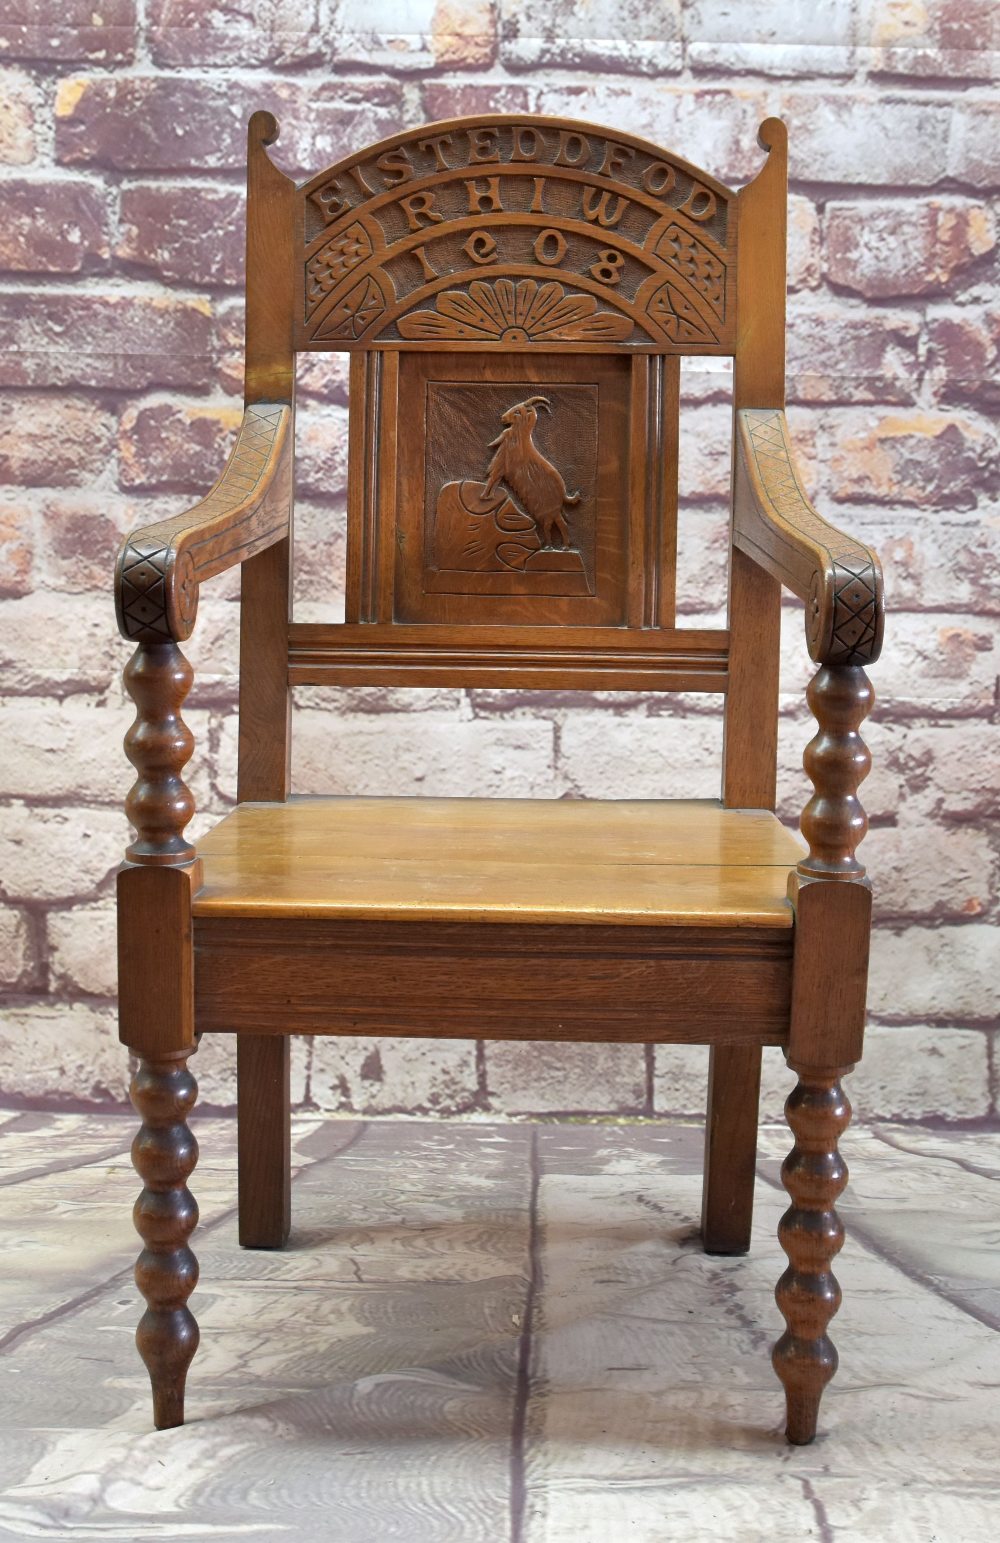 EISTEDDFOD CHAIR 1908 with carved panel of mountain goat, inscribed Eisteddfod Rhiw 1908 (with - Image 3 of 3